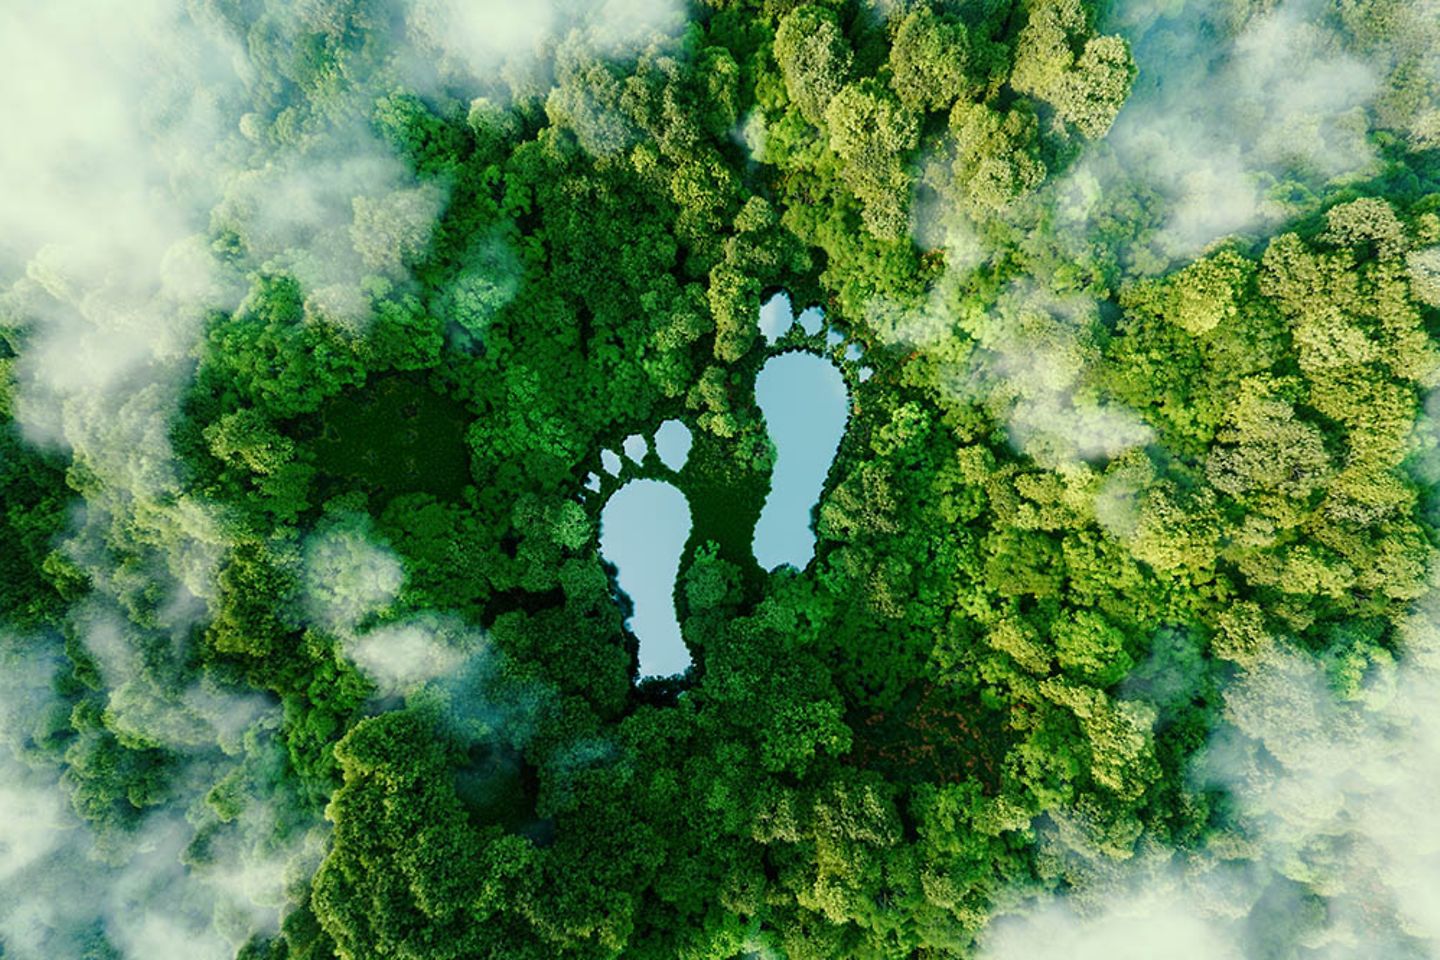 Two lakes in the form of footprints in the middle of the forest